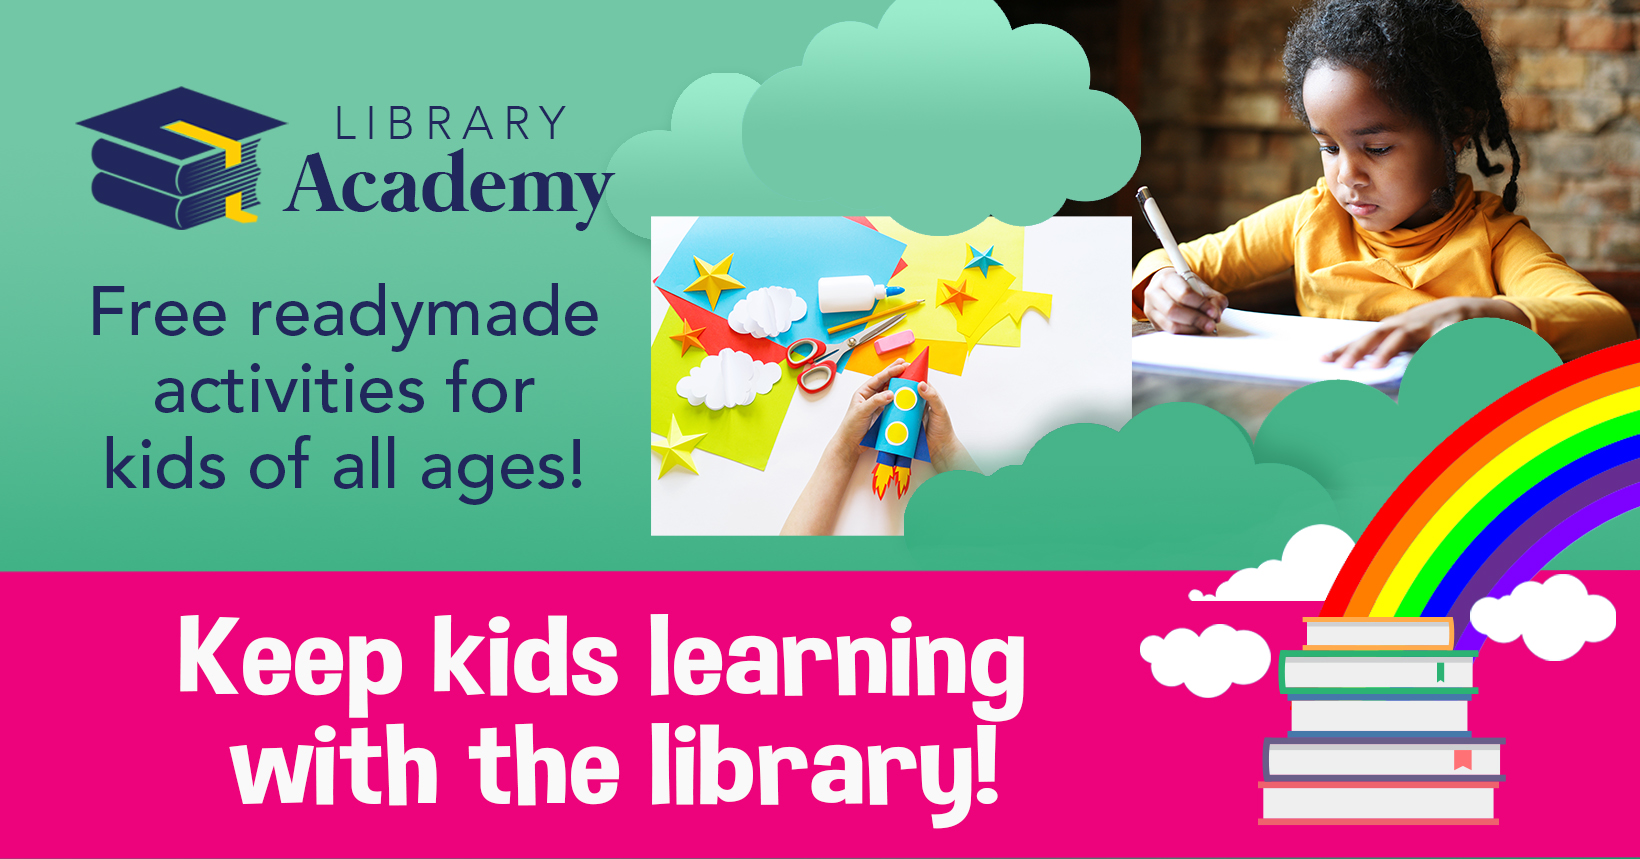 Library Academy - Free readymade activities for kids of all ages! Keep kids learning with the library!